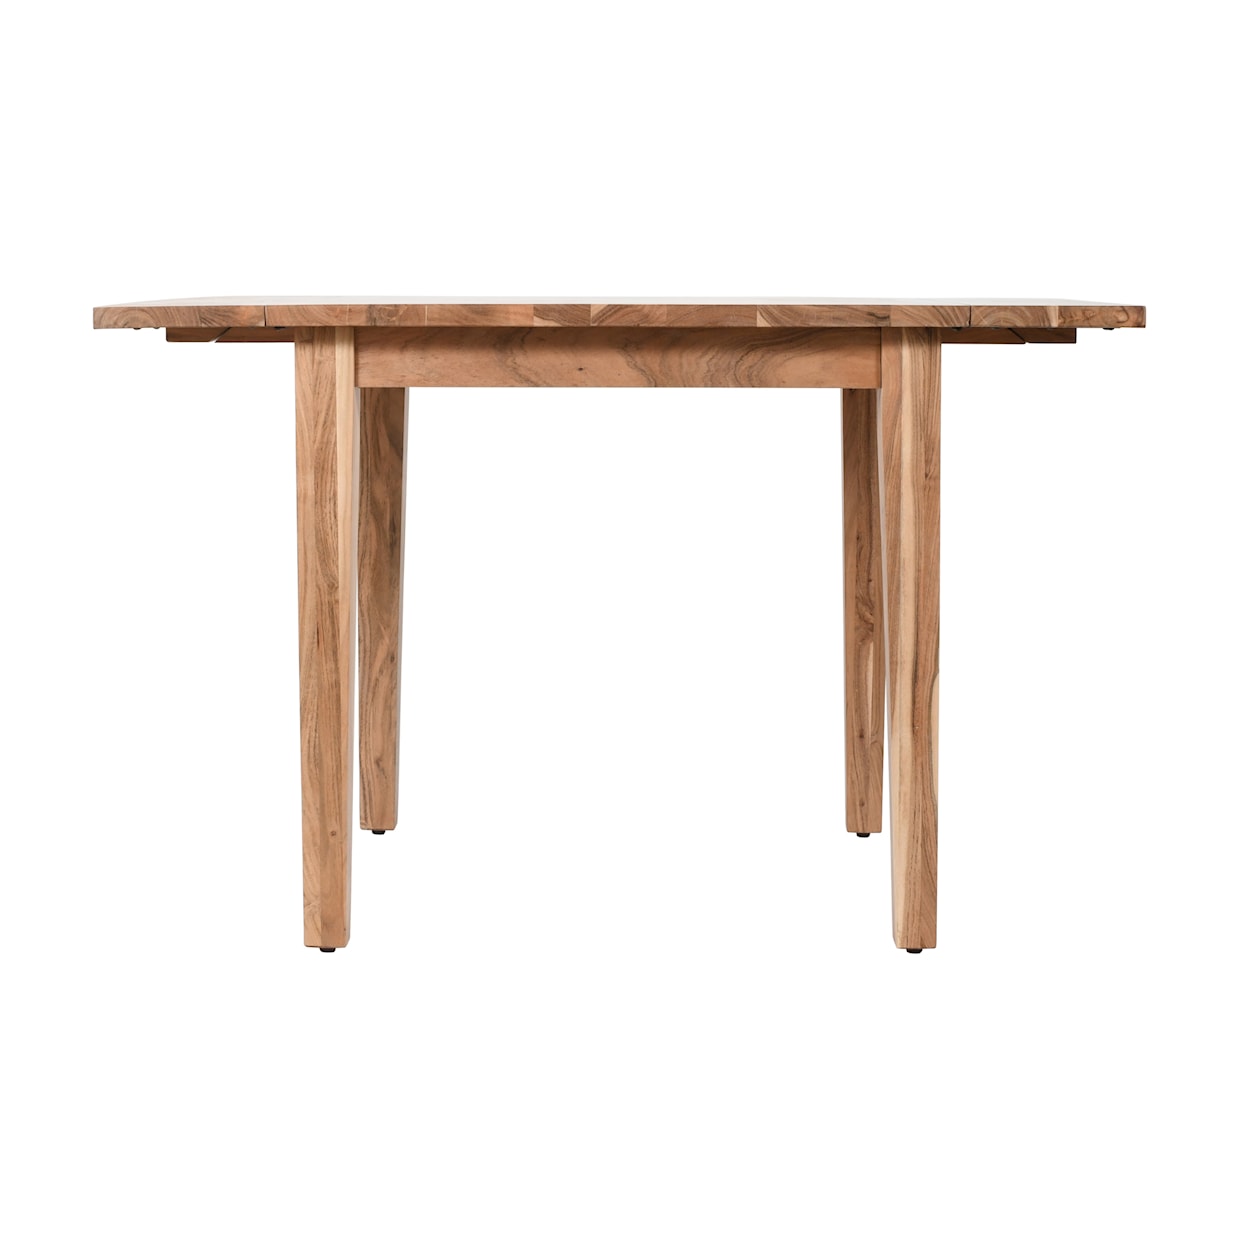 Jofran Colby Drop Leaf Dining Table